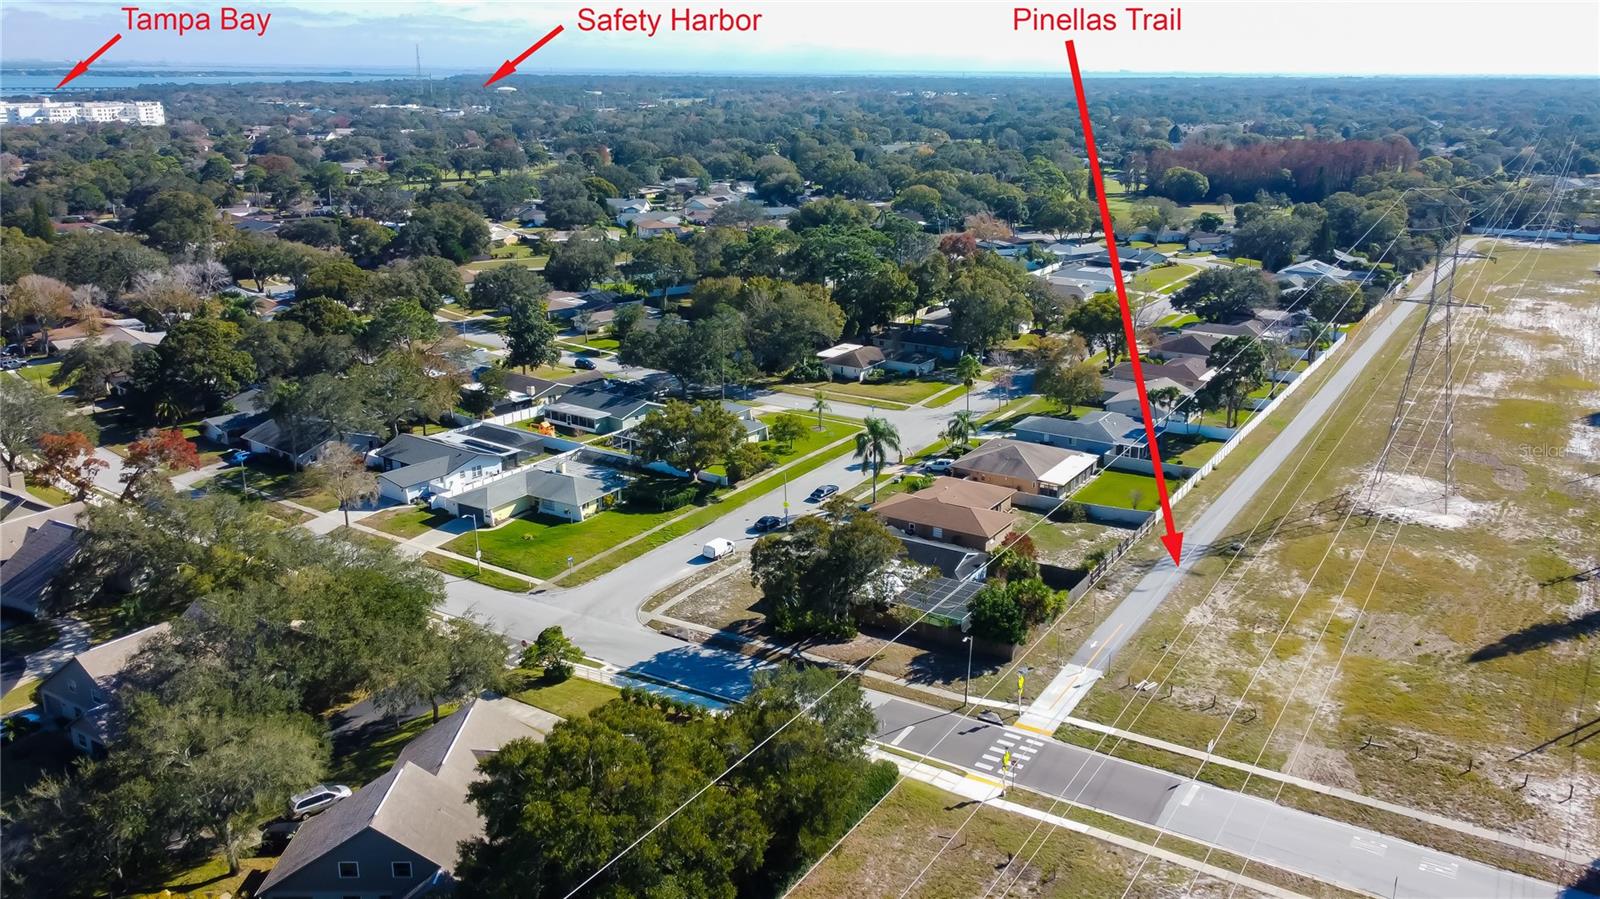 Pinellas Trail Extension Runs Alongside the Duke Energy Power Lines.. This Leads to Countryside Mall!